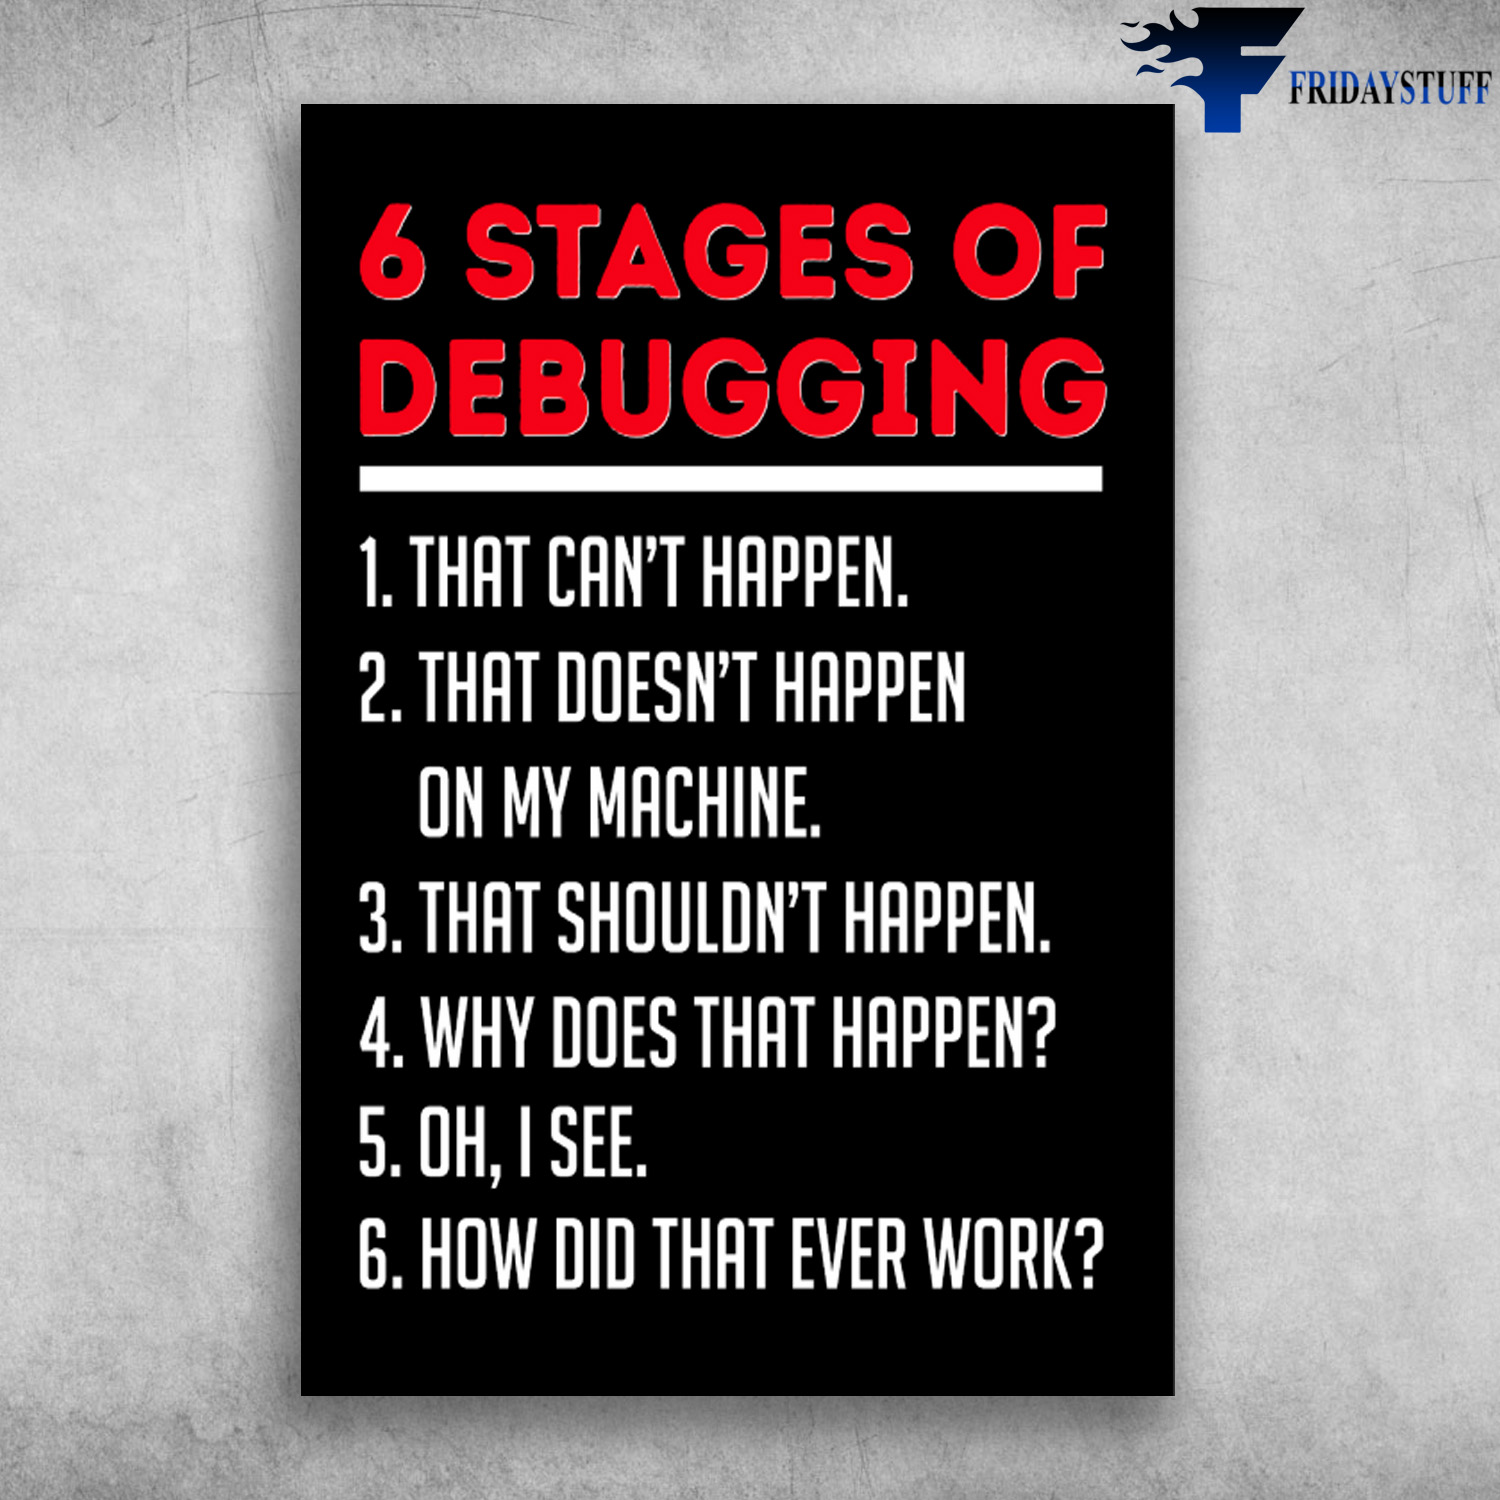 6 Stages Of Debugging - That Can't Happen, That Doesn't Happen On My Machine, That Shouldn't Happen, Why Does That Happen, Oh I See, How Did That Ever Work